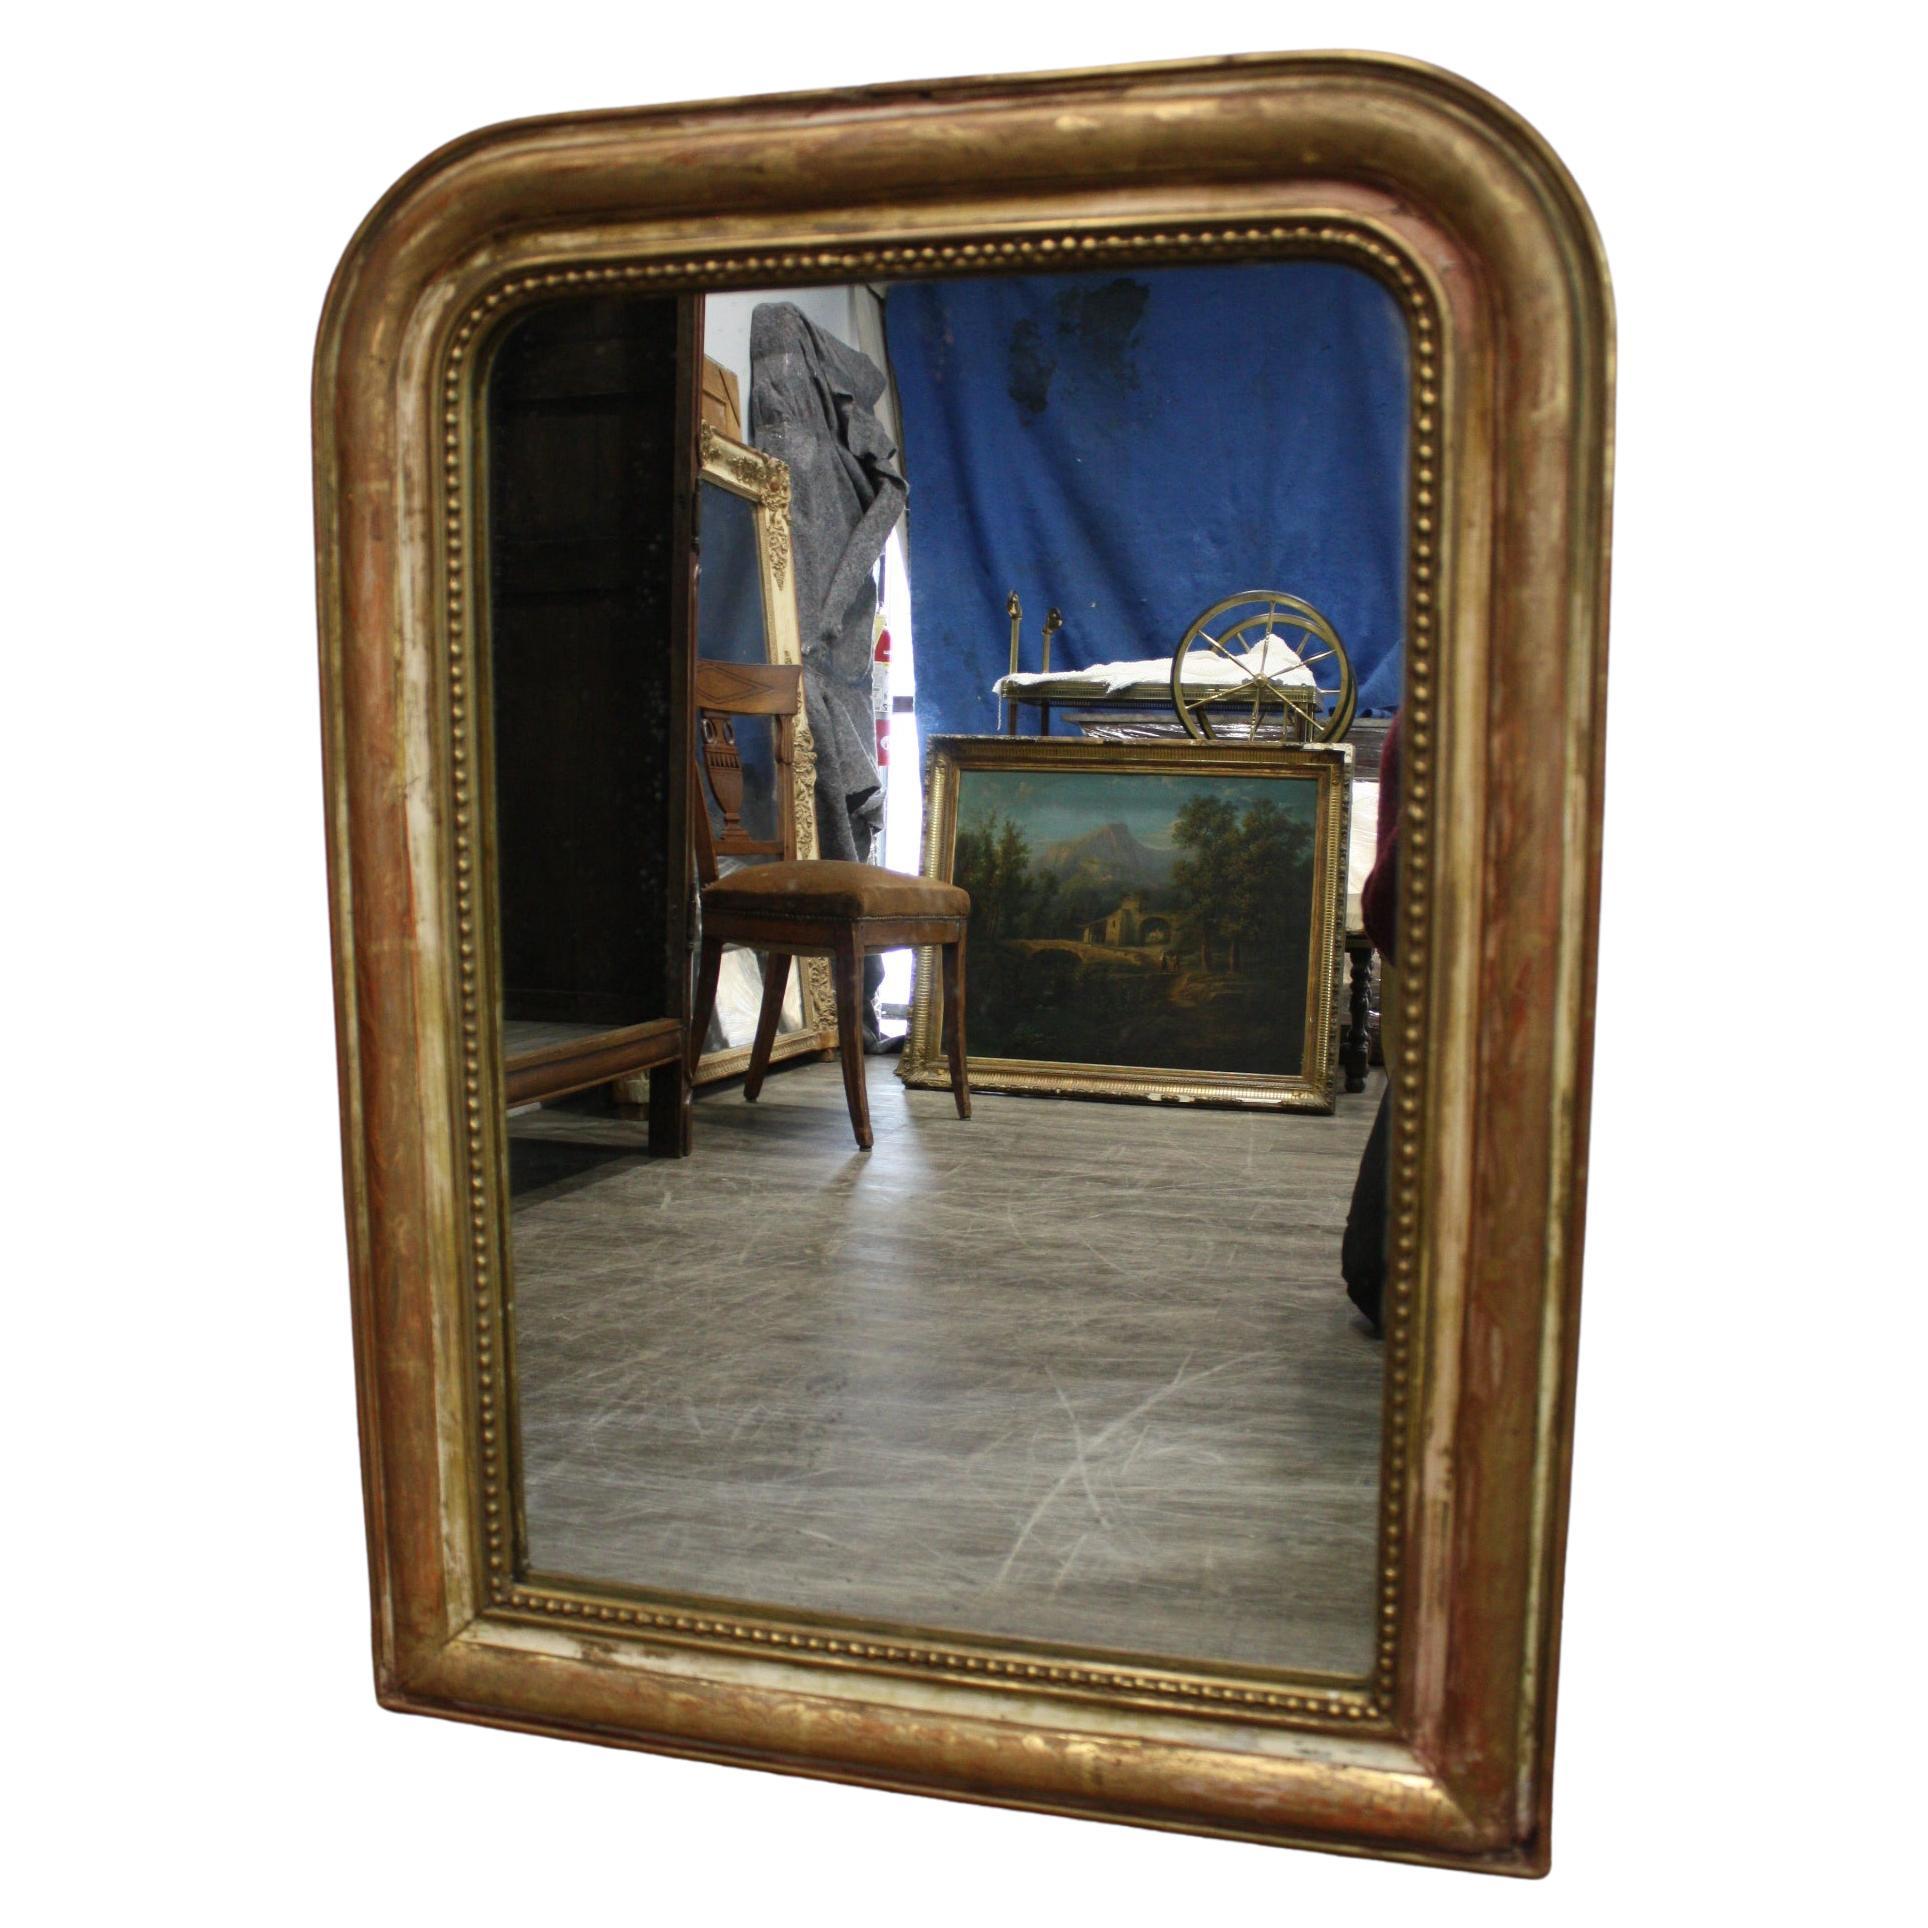 This mirror is covered of gold leaves, it is partially stripped and the glass mirror wear some  spots due to the age.